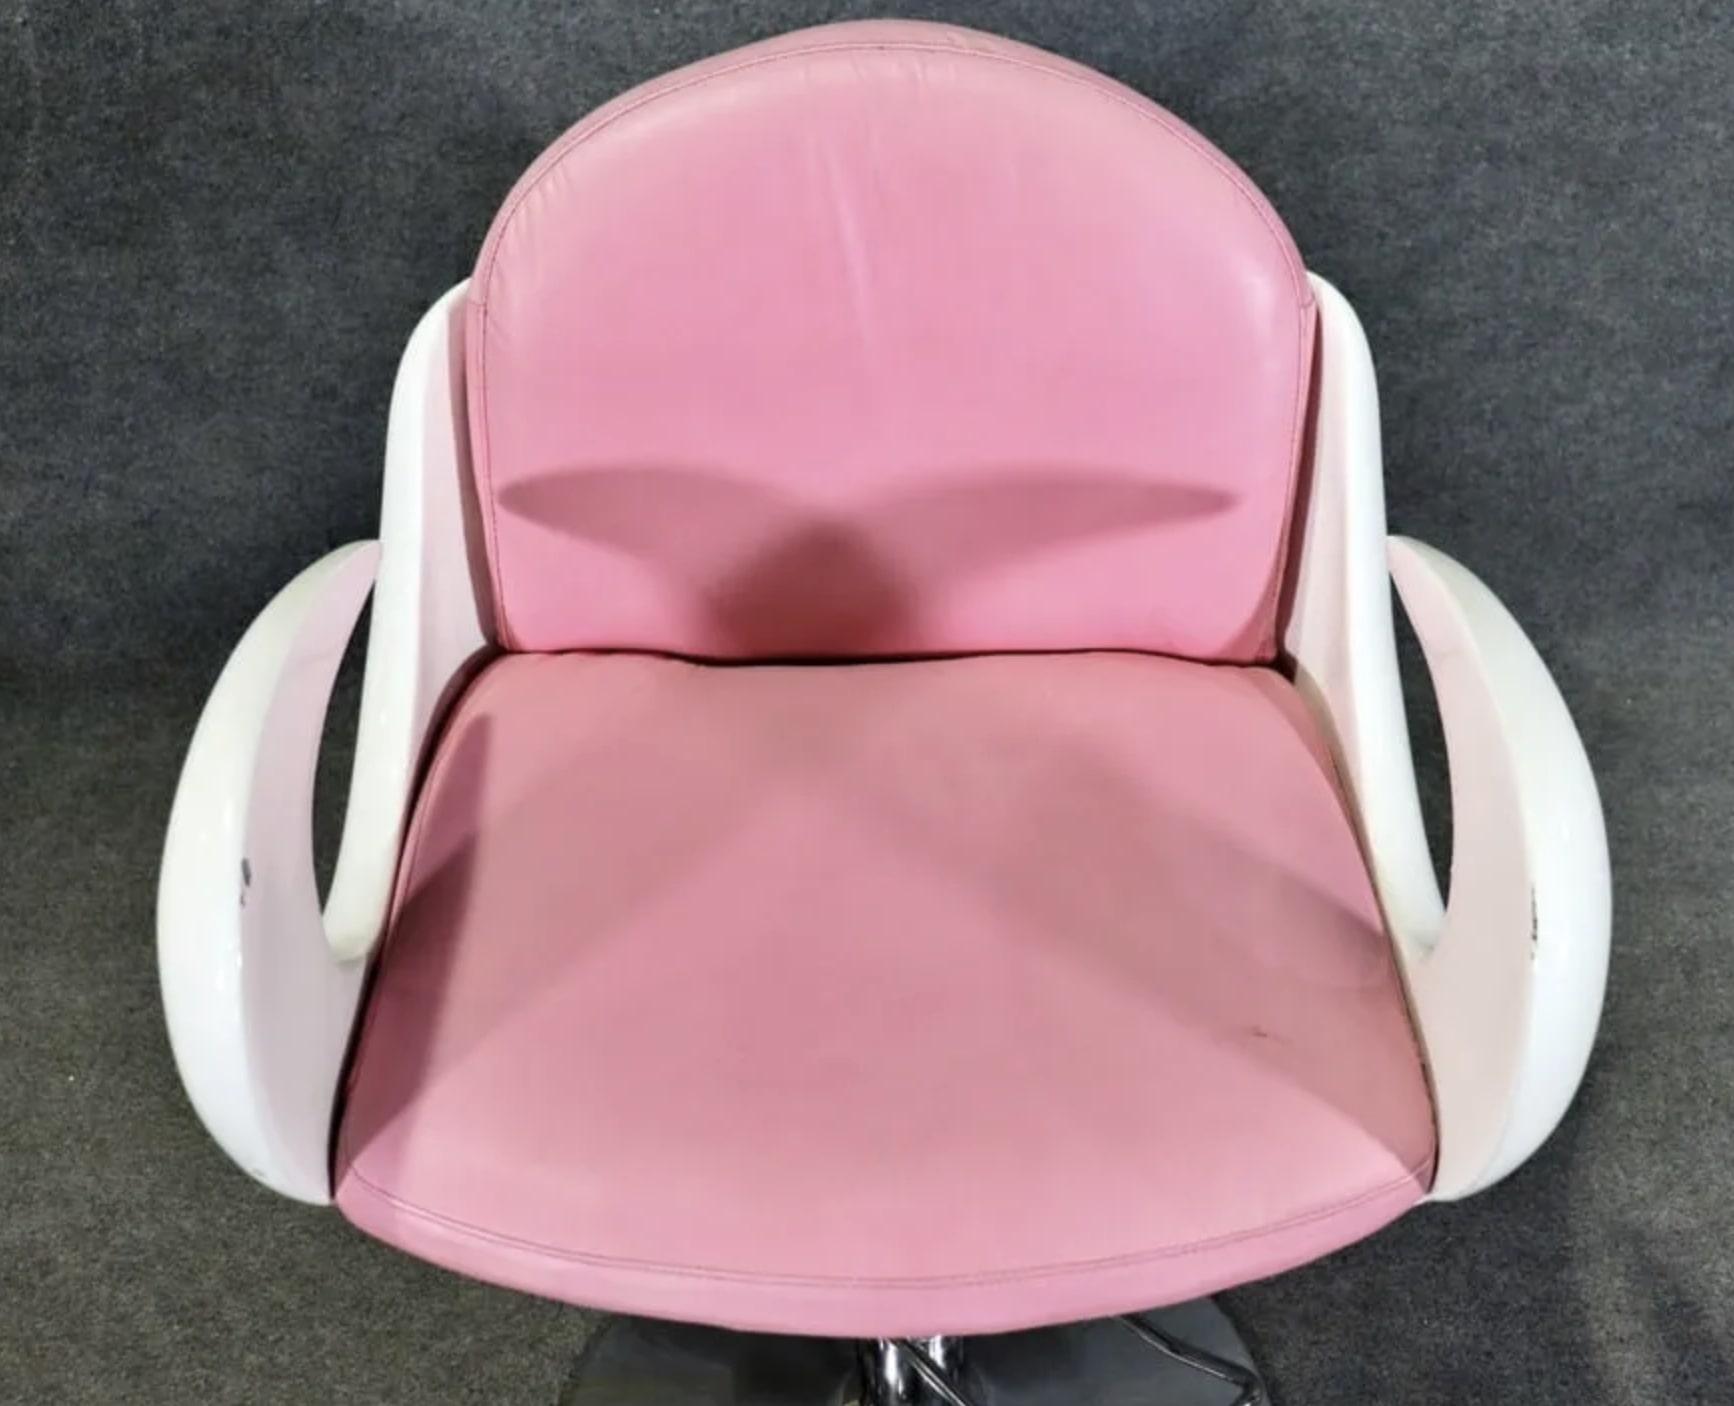 Rare barbershop chair in white and pink. Curled arms and polished metal base.
Please confirm location NY or NJ